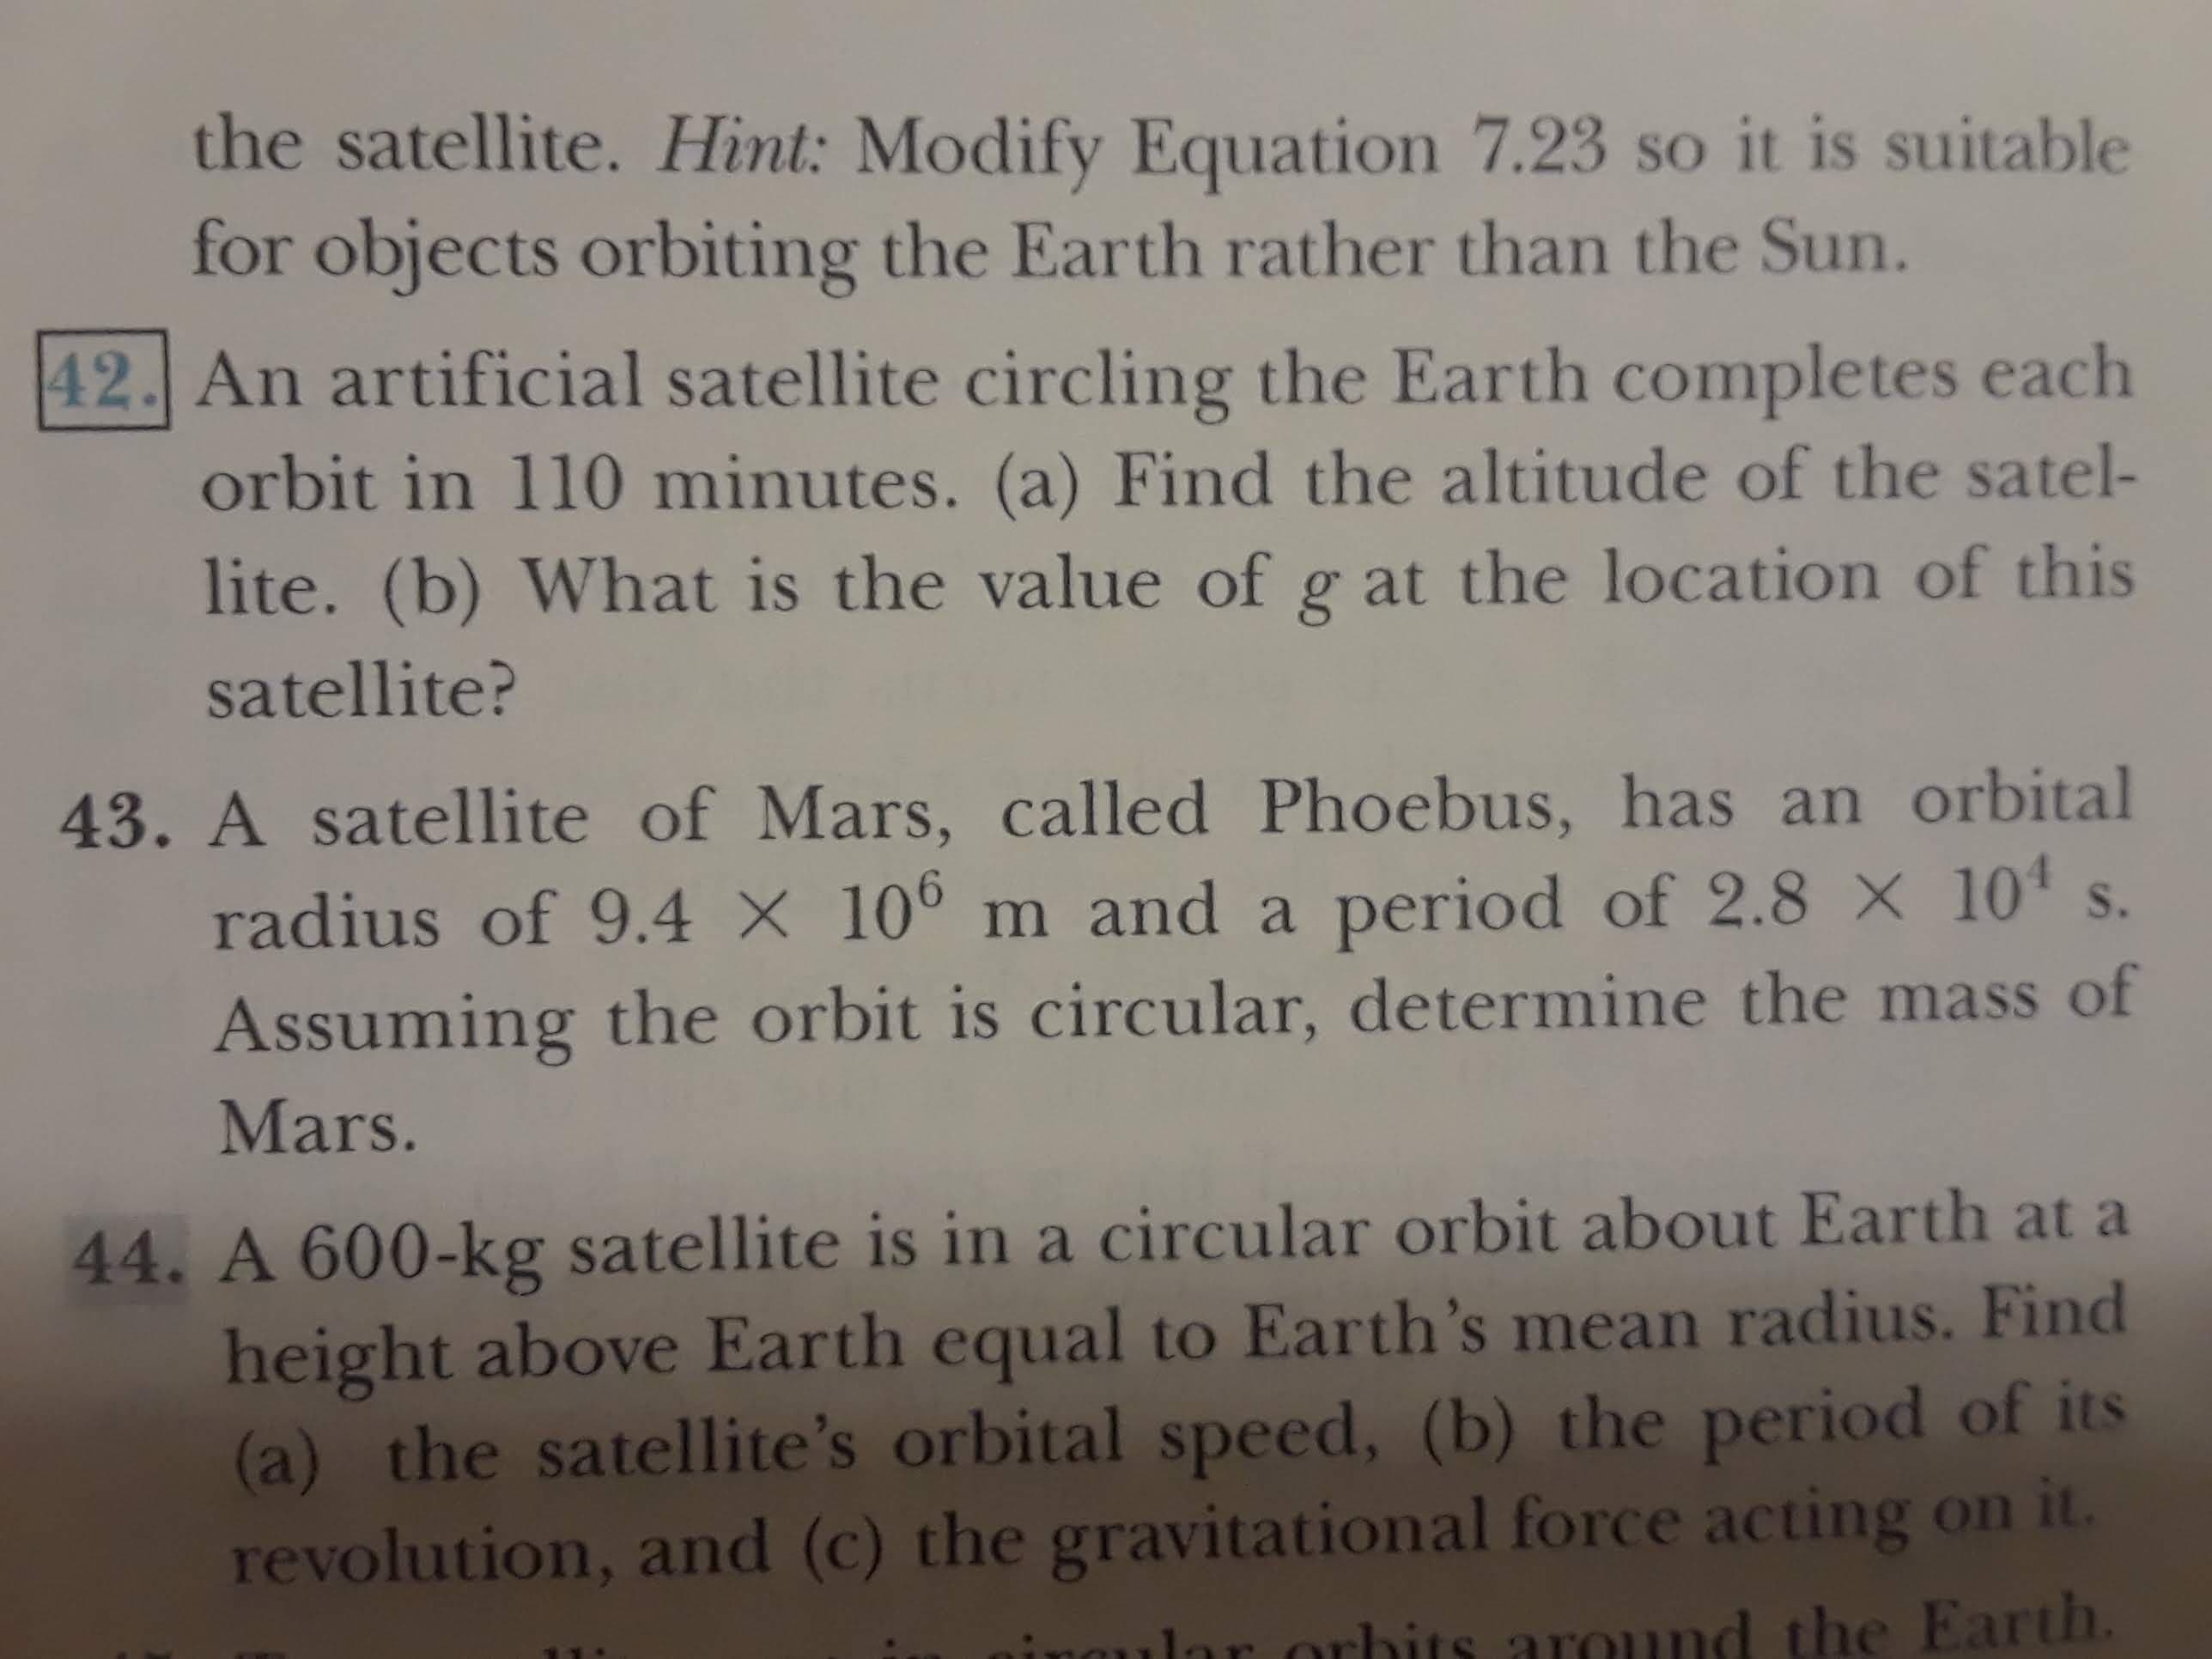 the satellite. Hint: Modify Equation 7.23 so it is suitable
for objects orbiting the Earth rather than the Sun.
42. An artificial satellite circling the Earth completes each
orbit in 110 minutes. (a) Find the altitude of the satel-
lite. (b) What is the value of g at the location of this
satellite?
43. A satellite of Mars, called Phoebus, has an orbital
radius of 9.4 X 100 m and a period of 2.8 X 10 s.
Assuming the orbit is circular, determine the mass of
Mars.
44. A 600-kg satellite is in a circular orbit about Earth at a
height above Earth equal to Earth's mean radius. Find
(a) the satellite's orbital speed, (b) the period of its
revolution, and (c) the gravitational force acting on it.
r orbits around the Earth.
